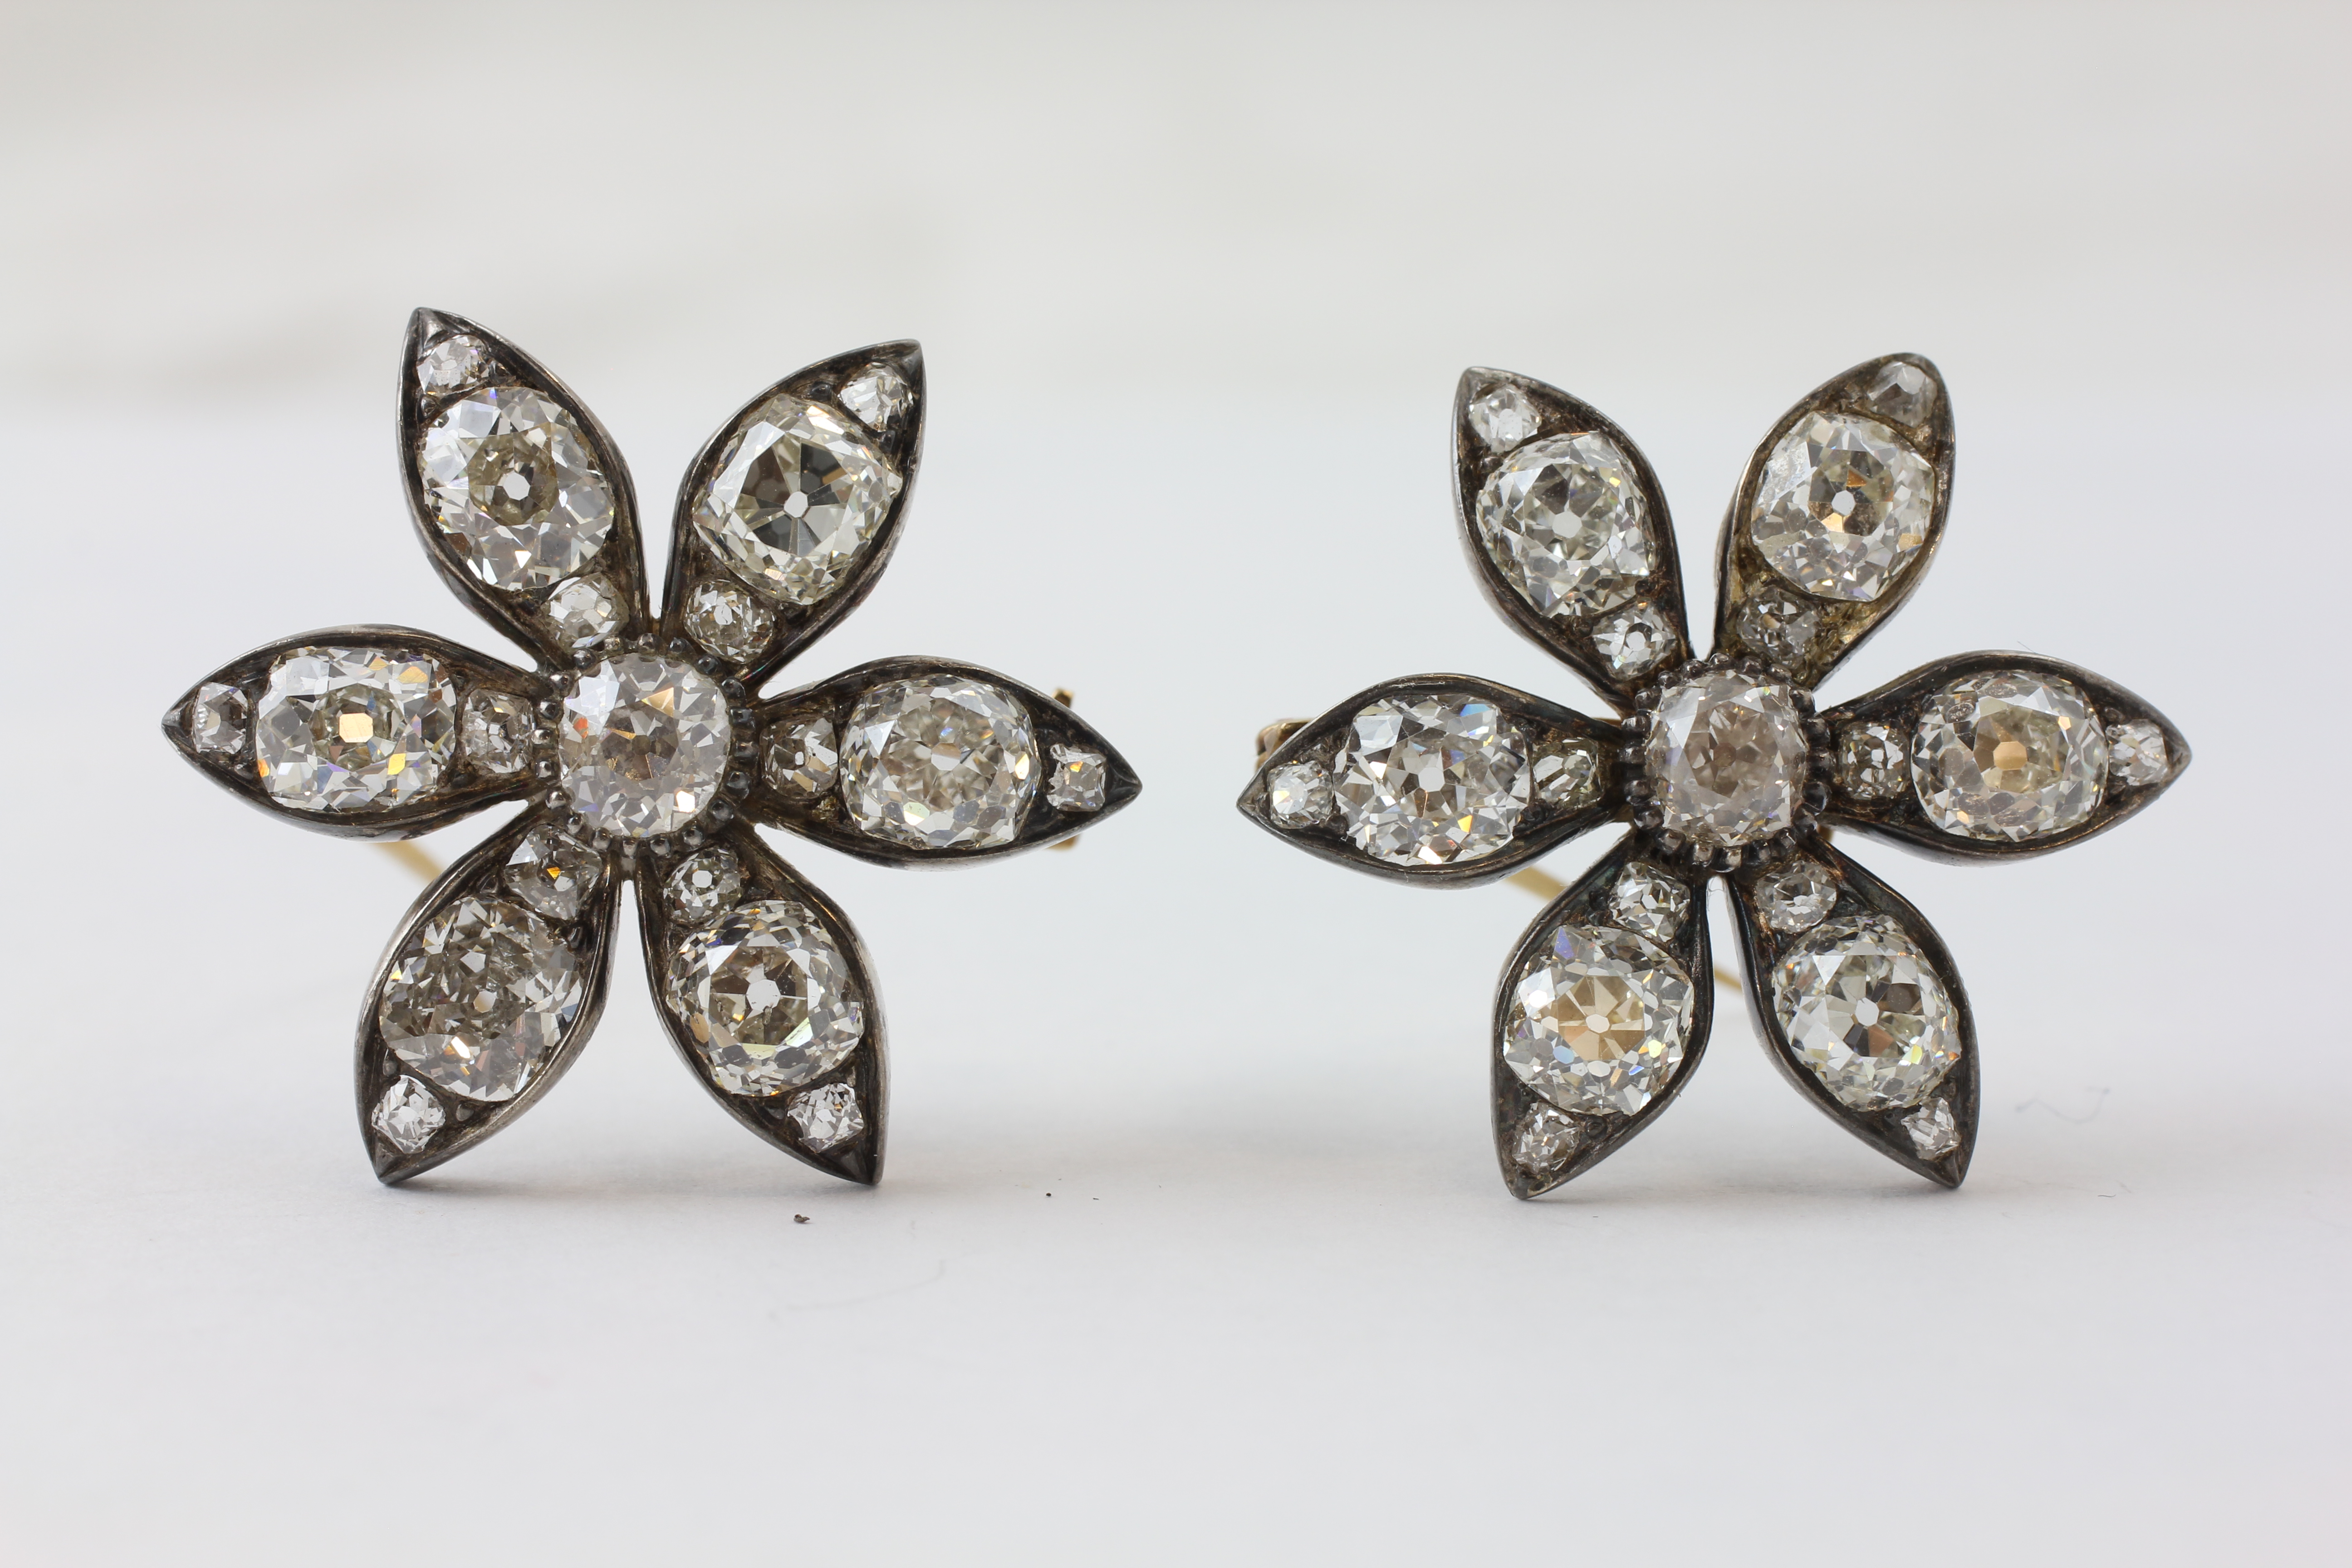 A PAIR OF DIAMOND FLOWERHEAD EARRINGS SET WITH OLD CUT STONES, THE ATTACHMENT ADJUSTABLE,